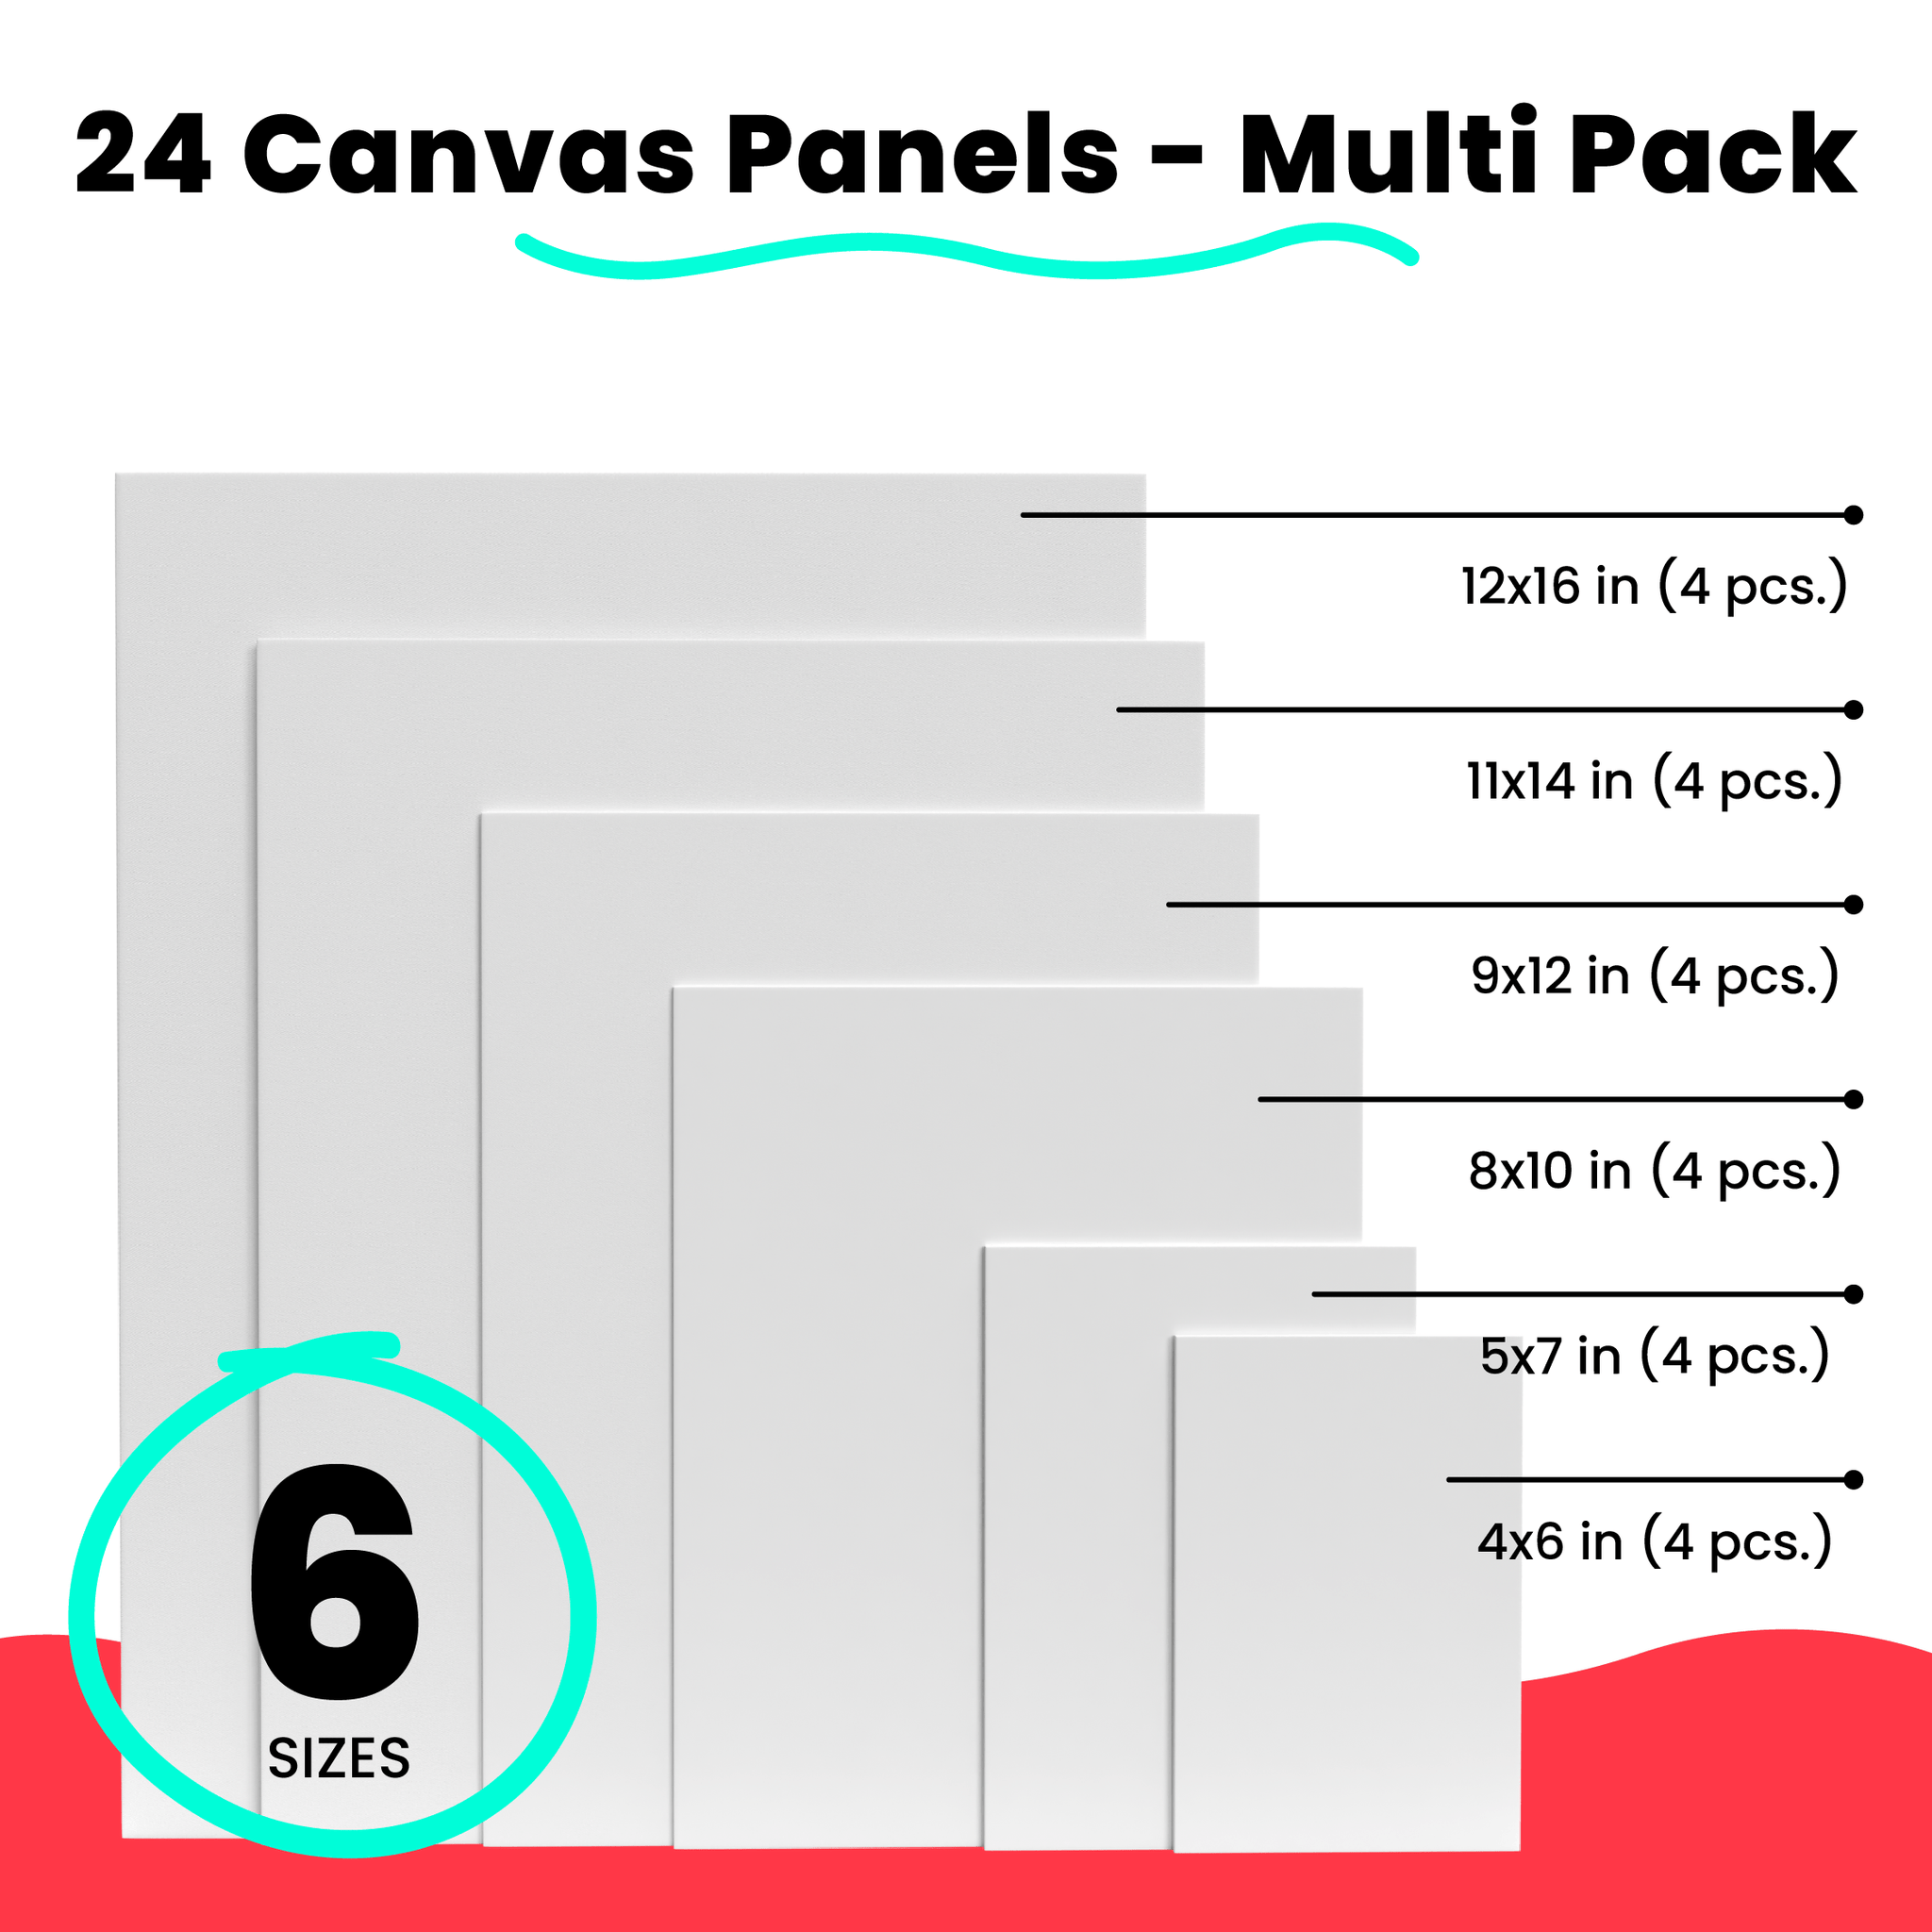 What are Standard Canvas Sizes?